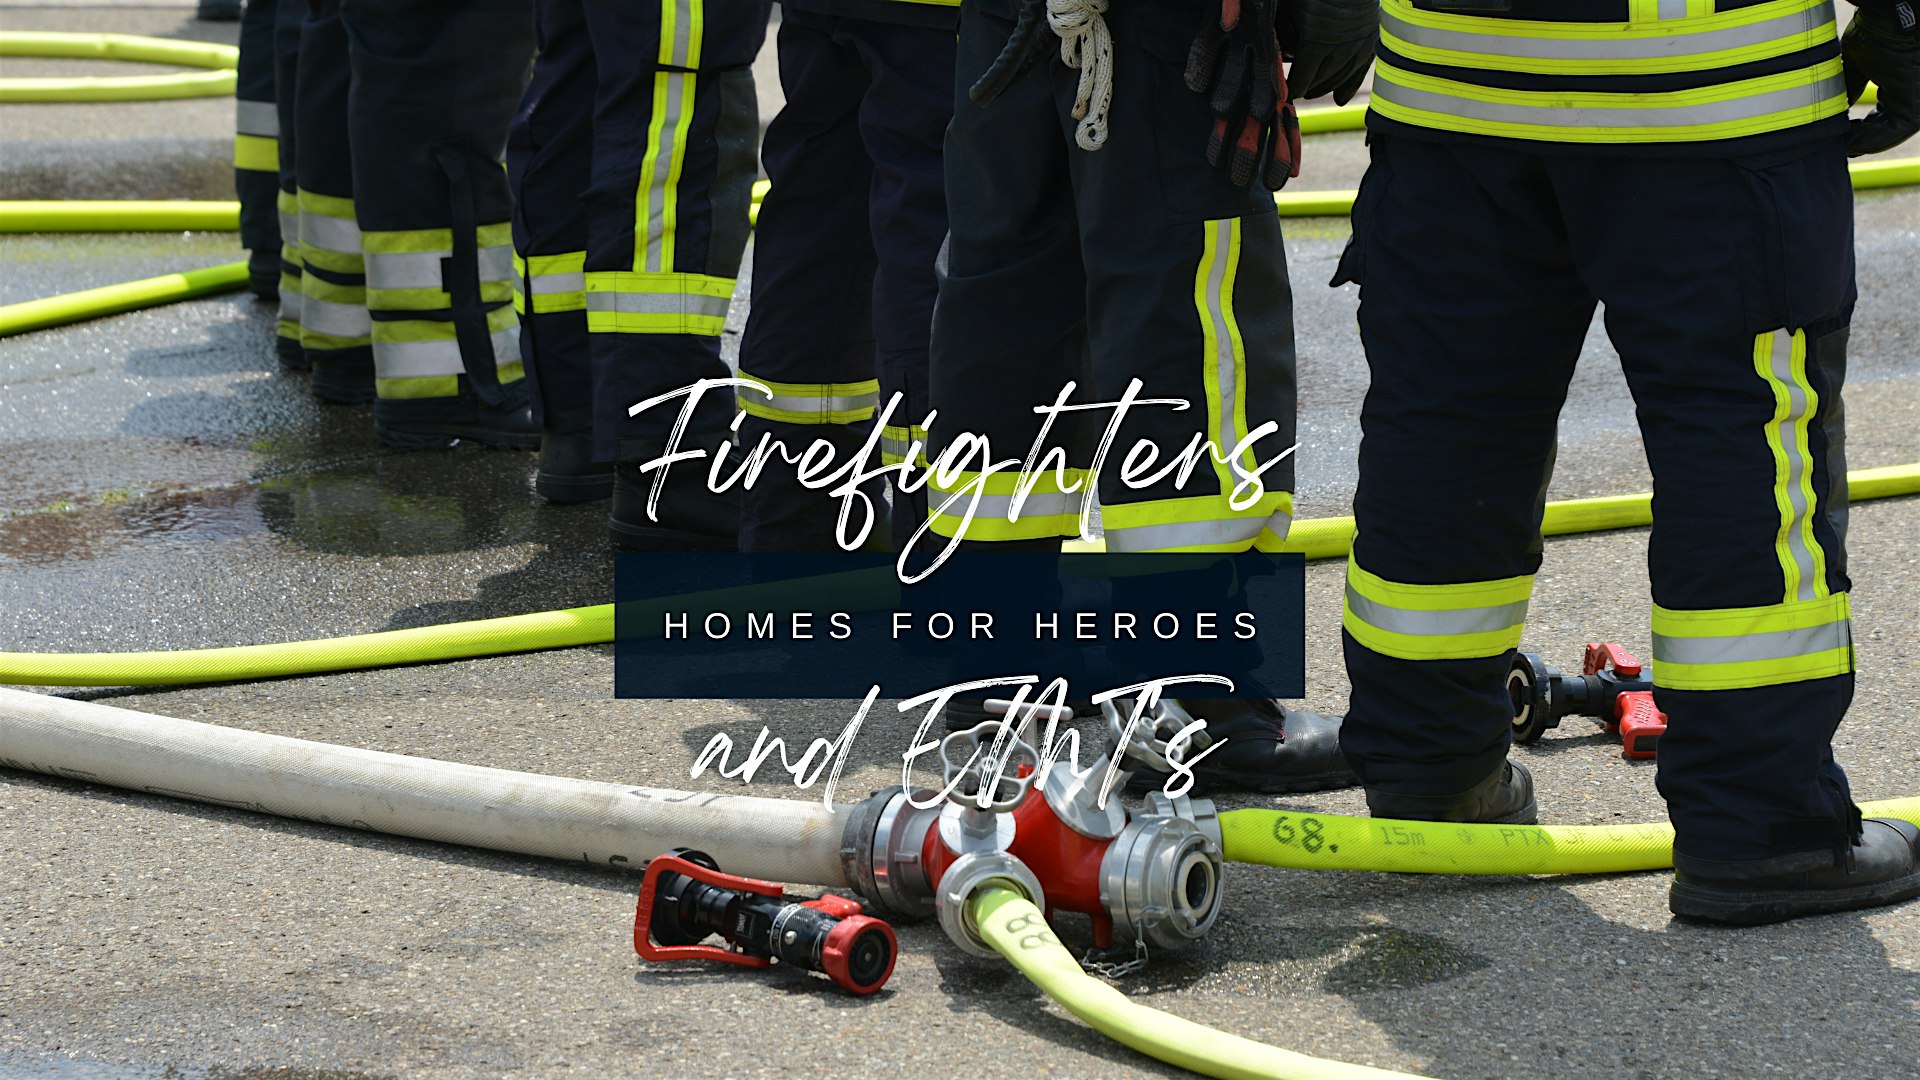 Homes for Heroes Program for Firefighters and EMTs